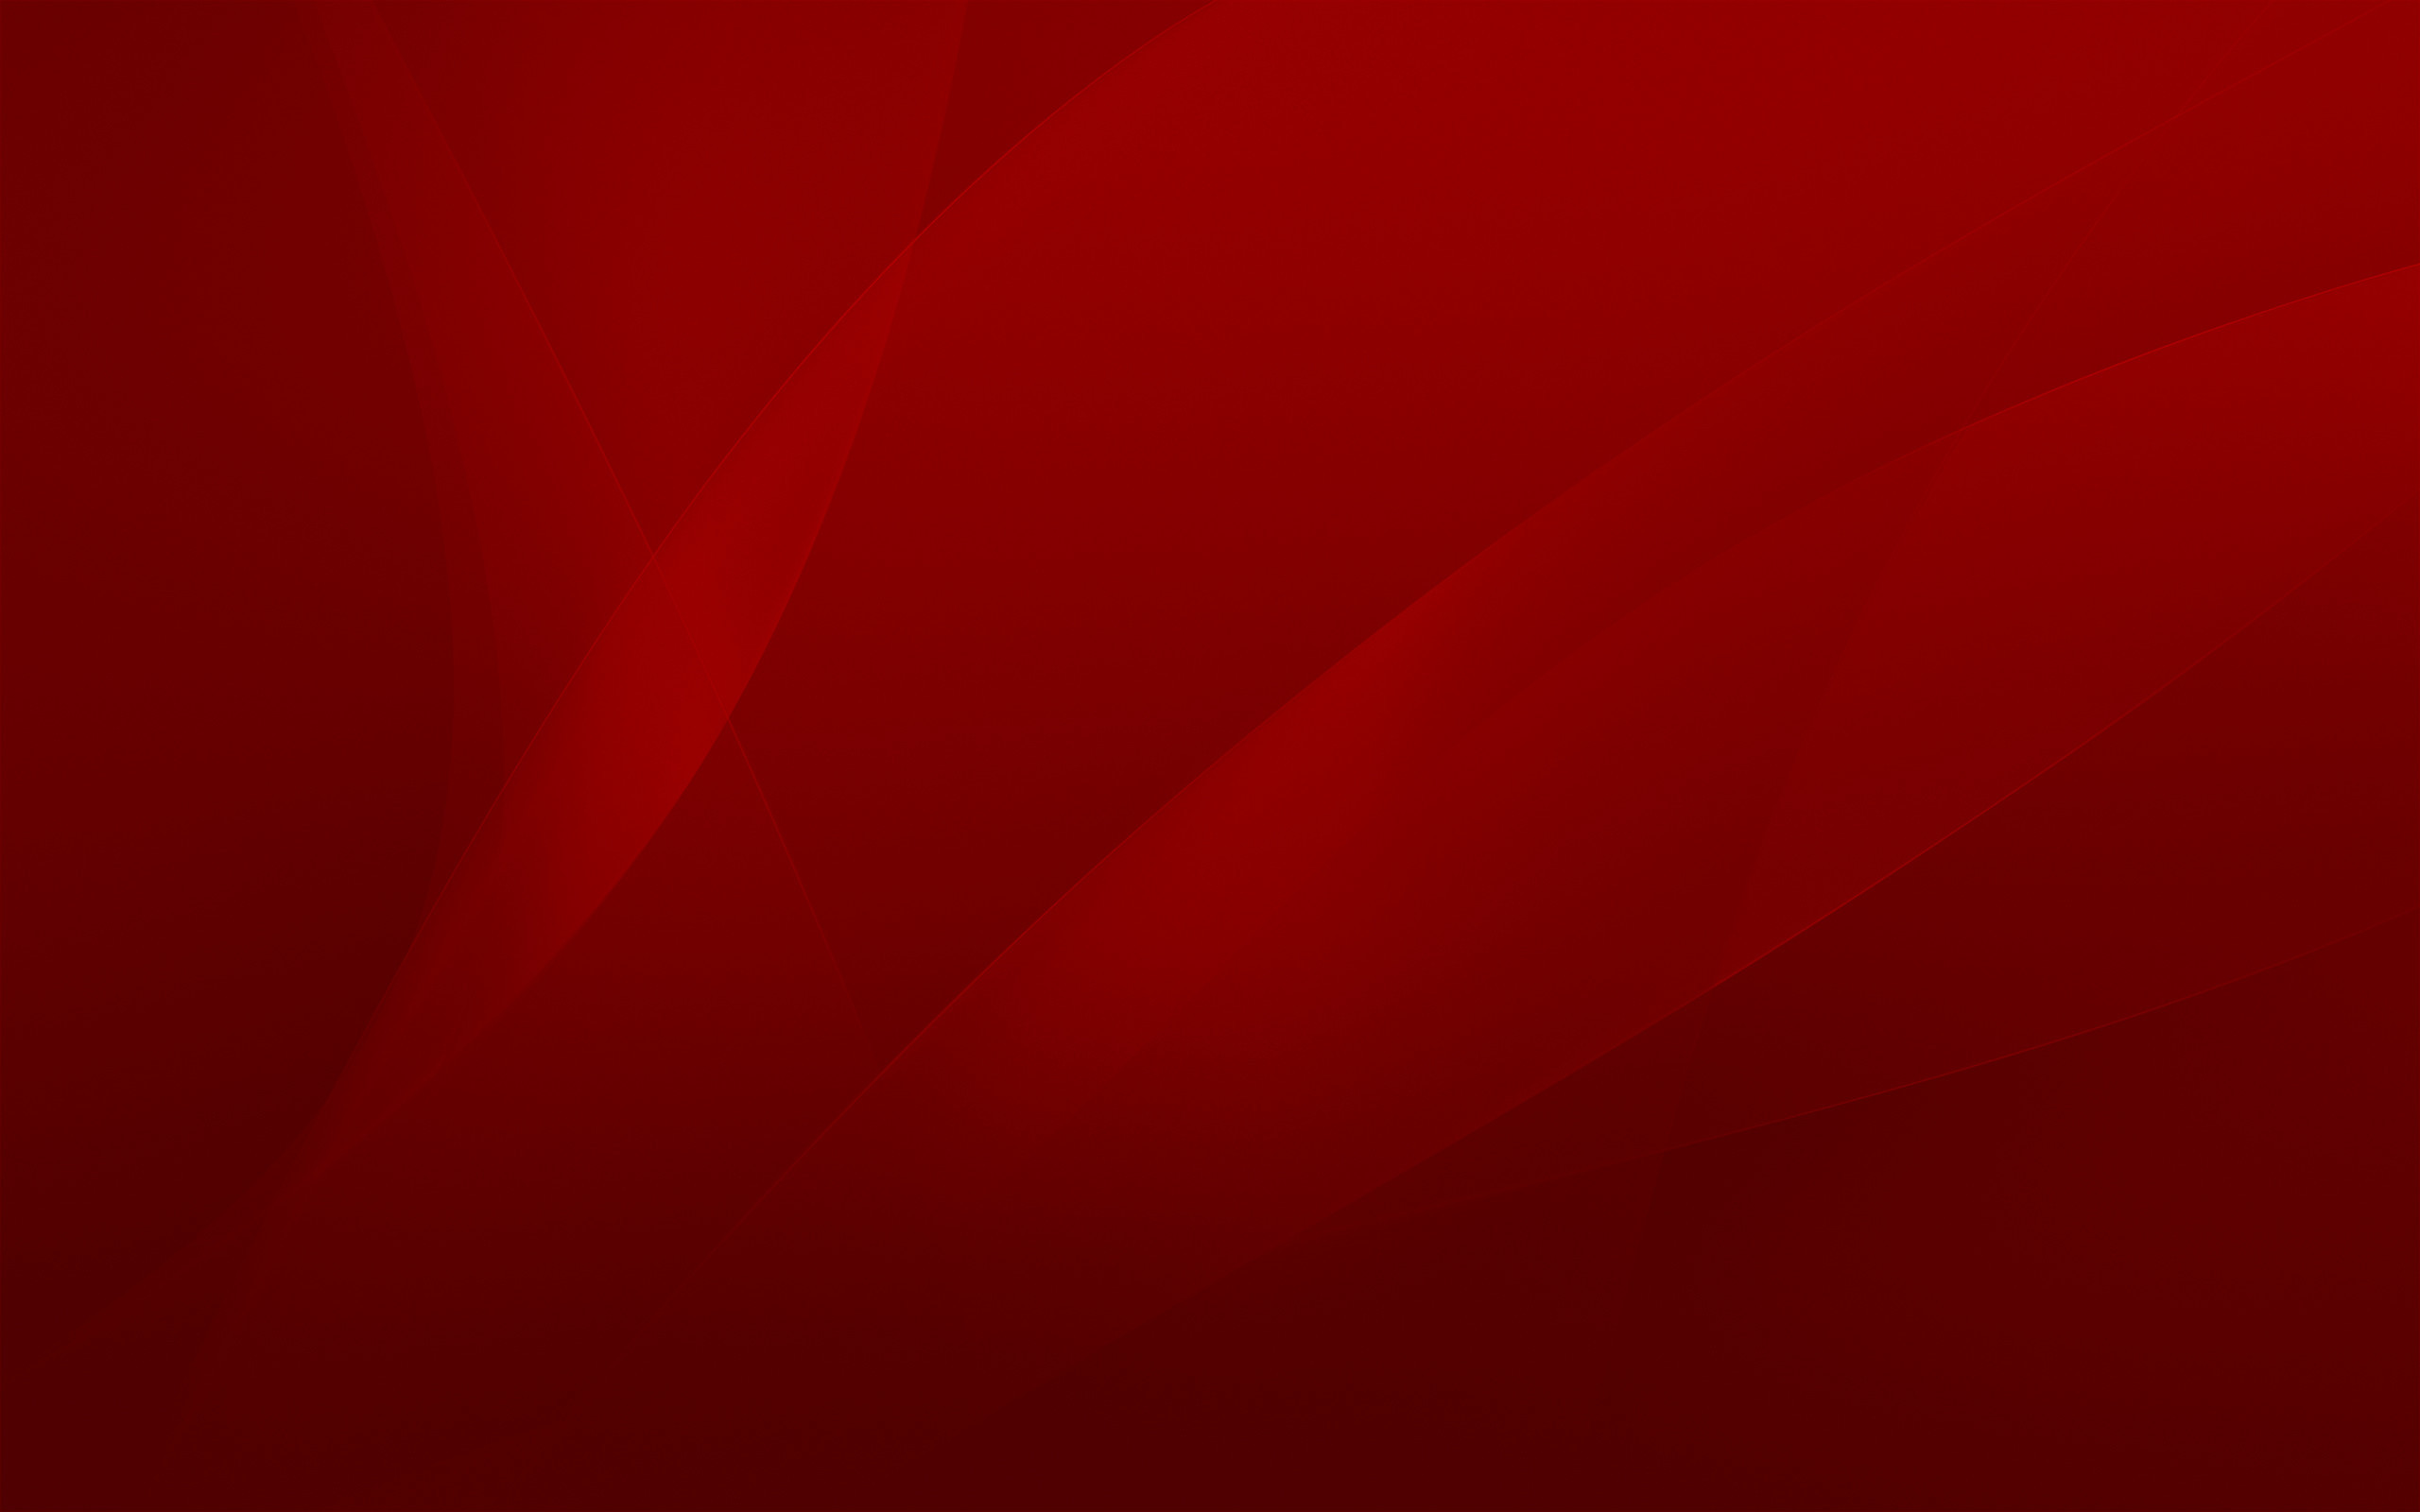 2560x1600 2560x1440 2560x1440 Dark Candy Apple Red Solid Color Background